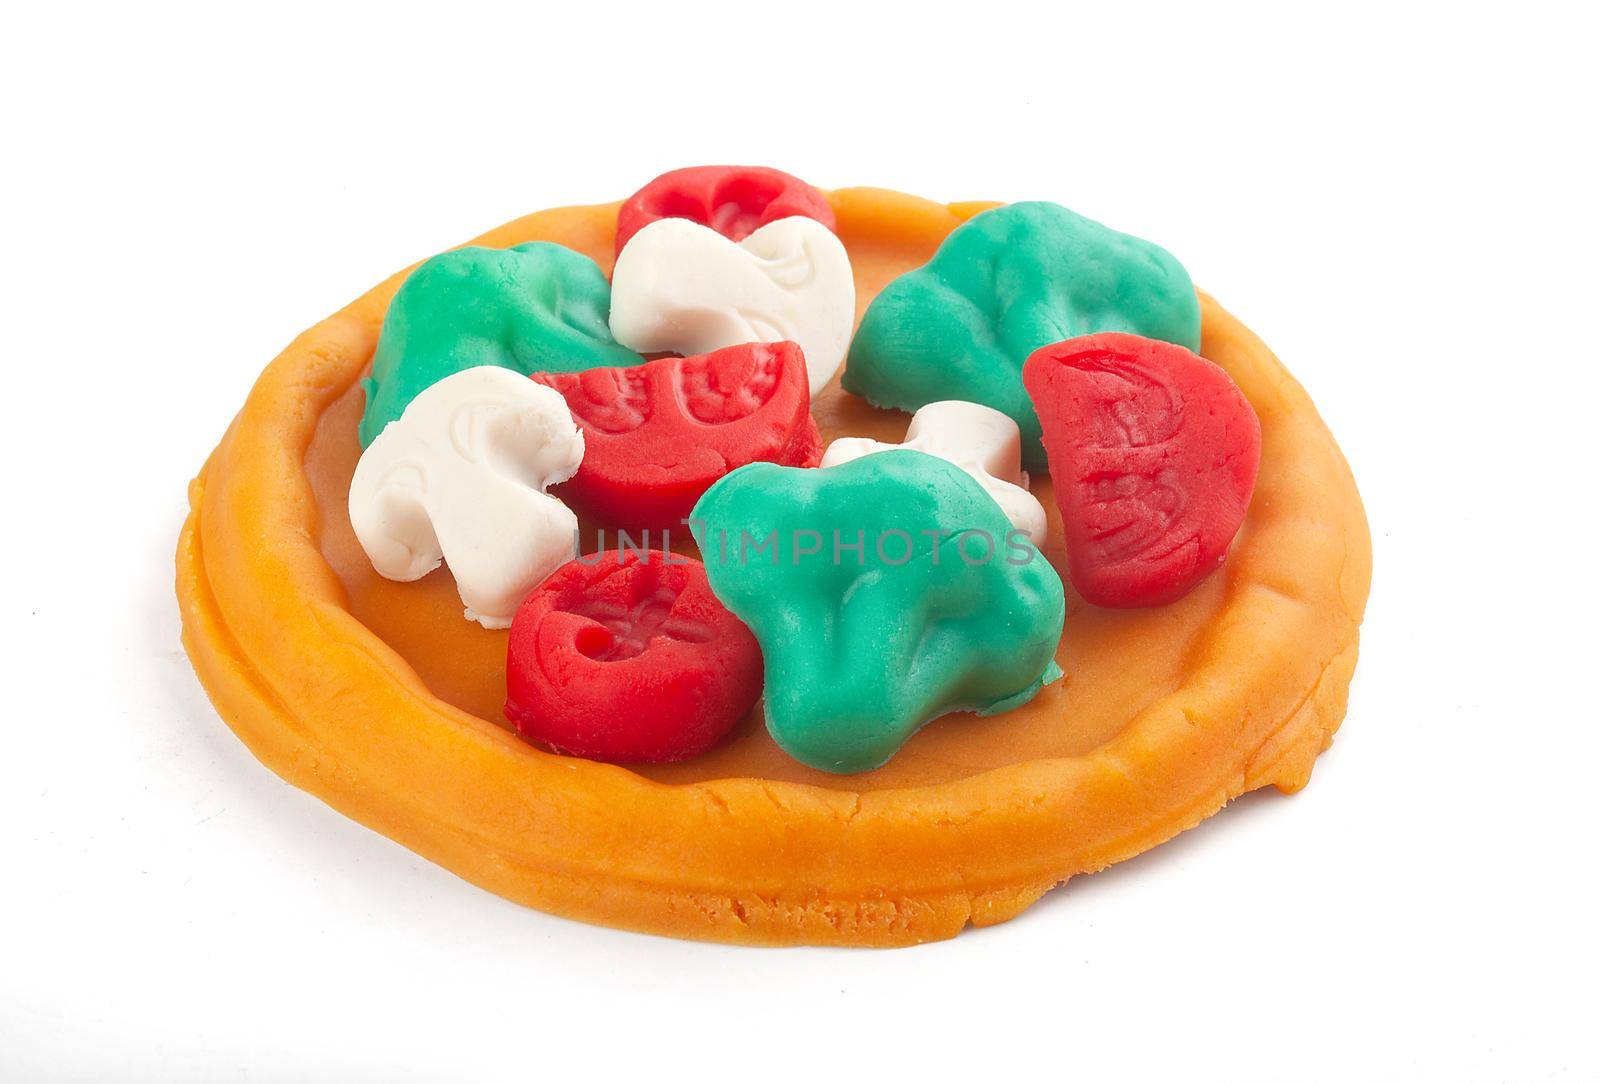 Isolated plasticine pizza on the white background